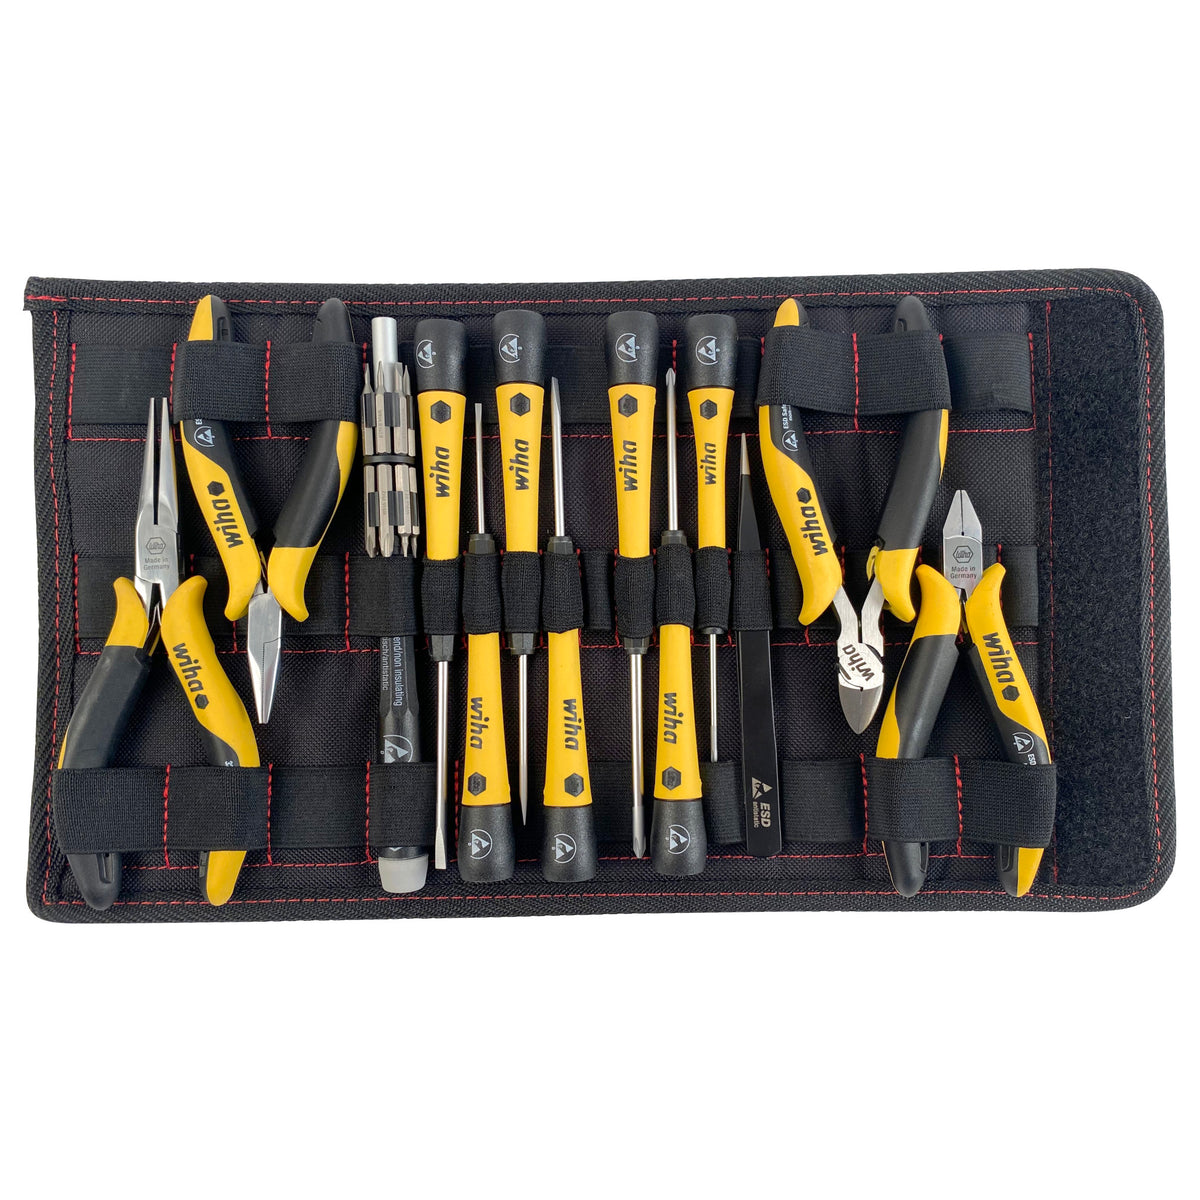 Wiha 45892 26 Piece ESD Safe PicoFinish Precision Screwdrivers Pliers and Bits Set with Heavy Duty Velcro Pouch